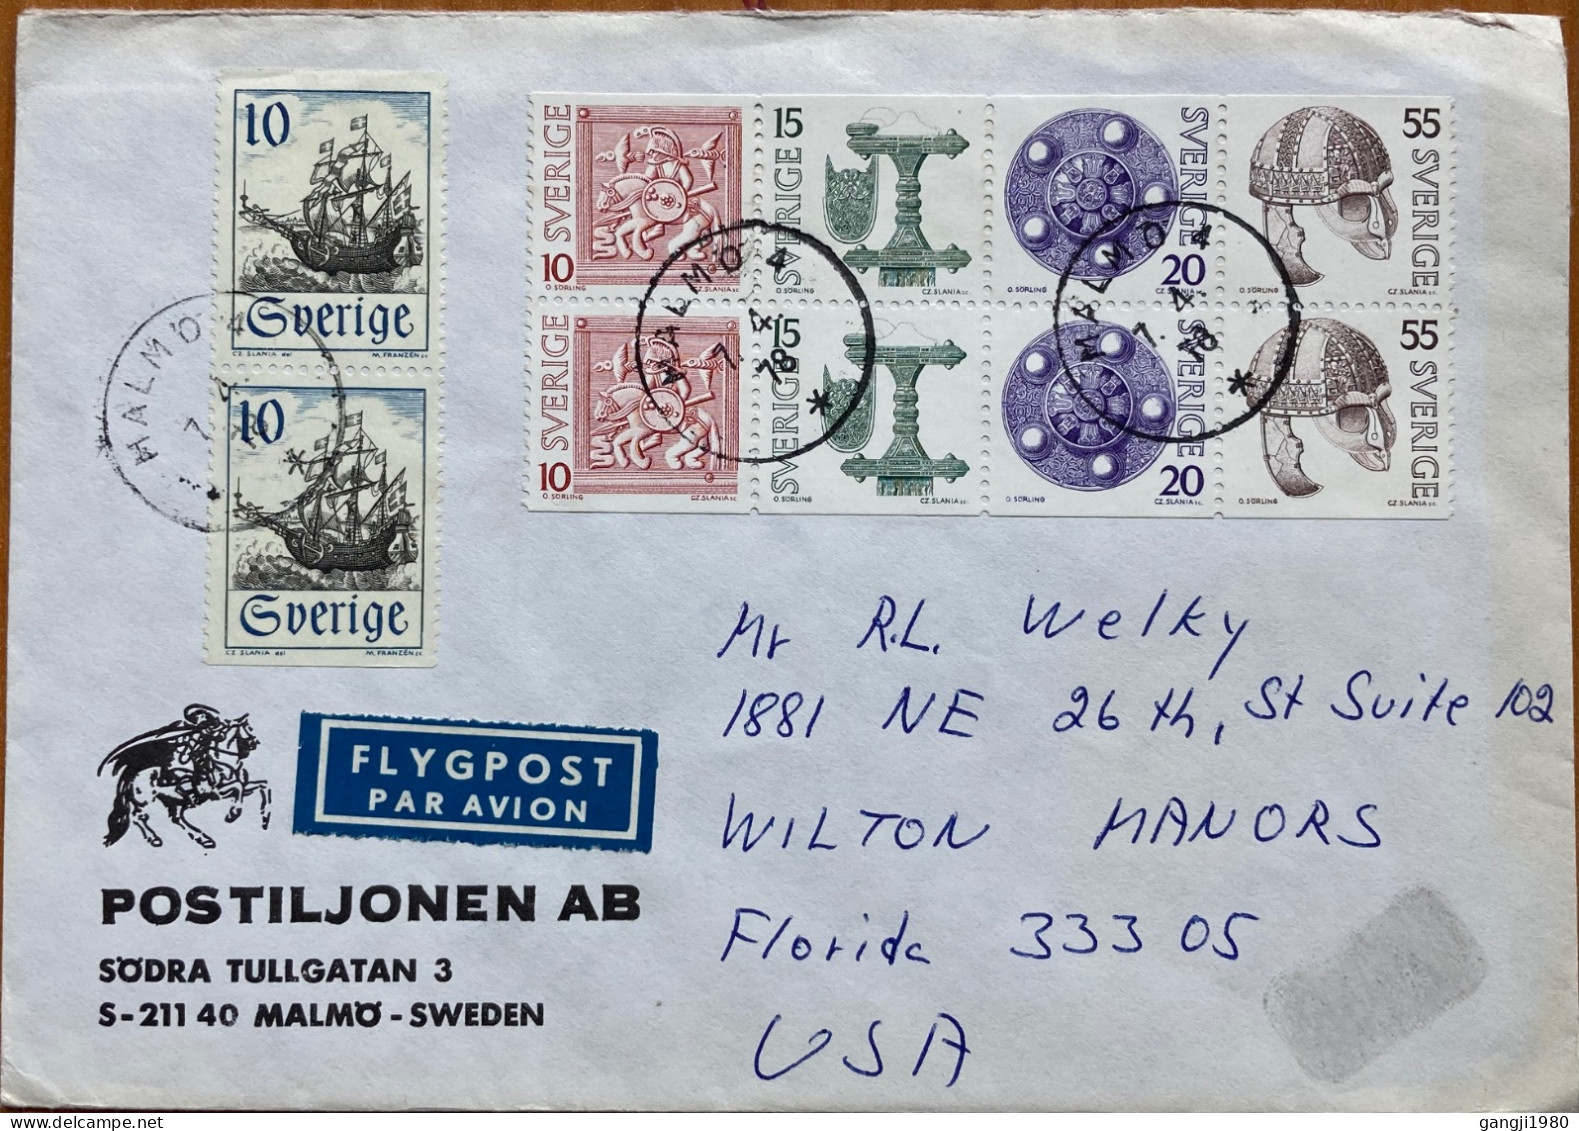 SWEDEN 1978, ILLUSTRATE COVER, USED TO USA, ARCHAEOLOGICAL DISCOVERY, BOOKLET PANE, MULTI 10 STAMP, HELMET, SHIELD, SHIP - Storia Postale